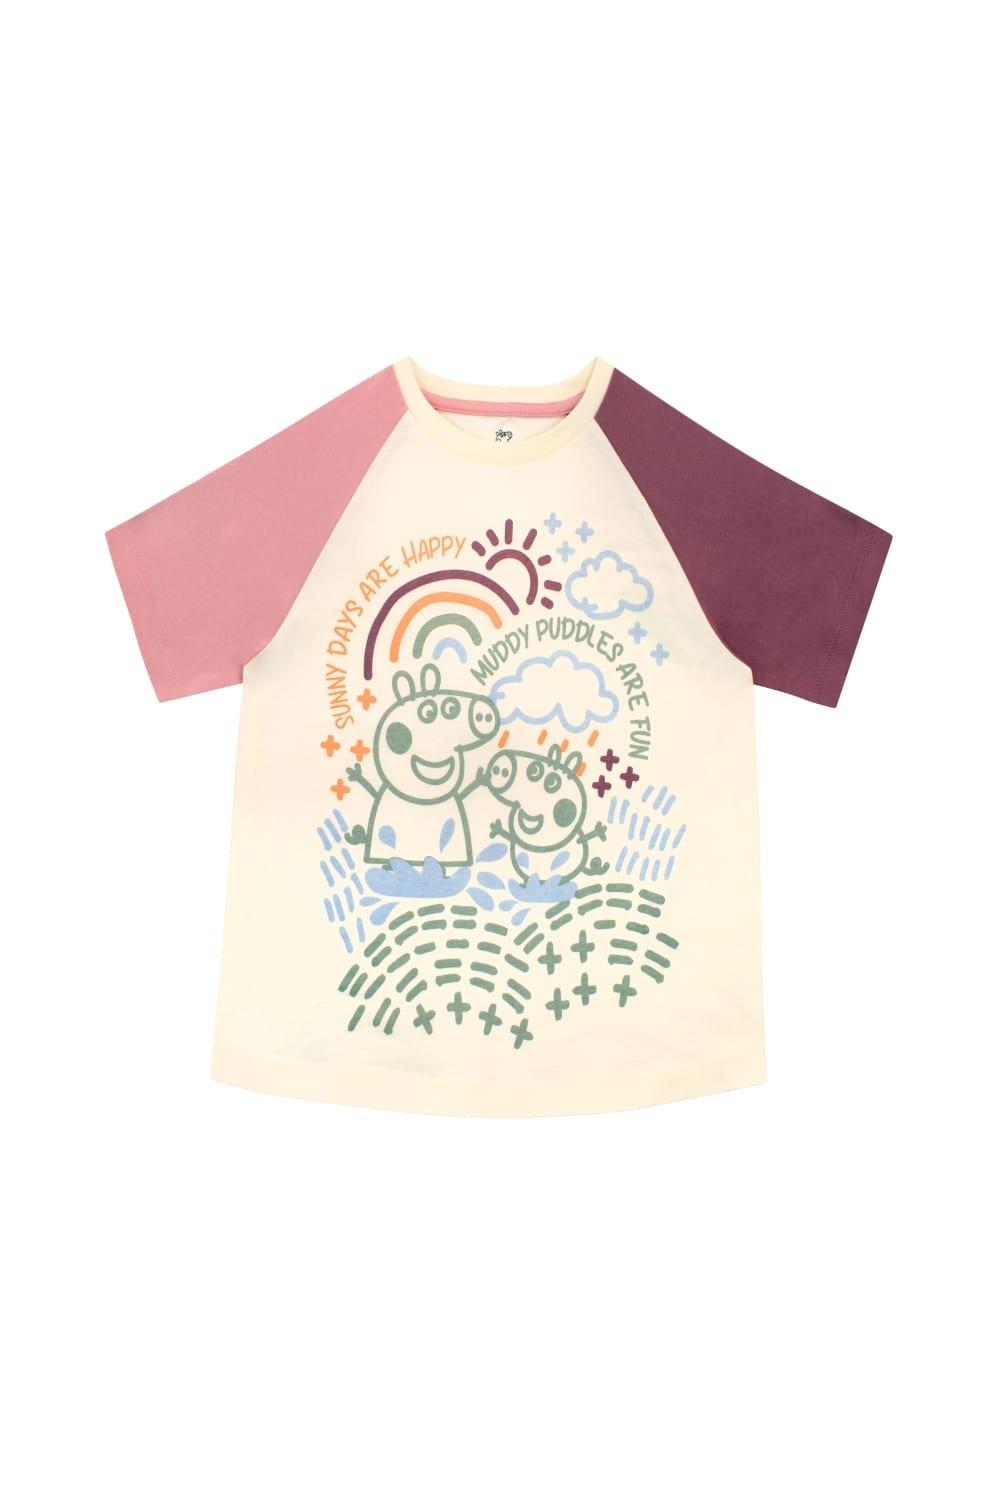 Muddy Puddles Are Fun Sustainable T-Shirt